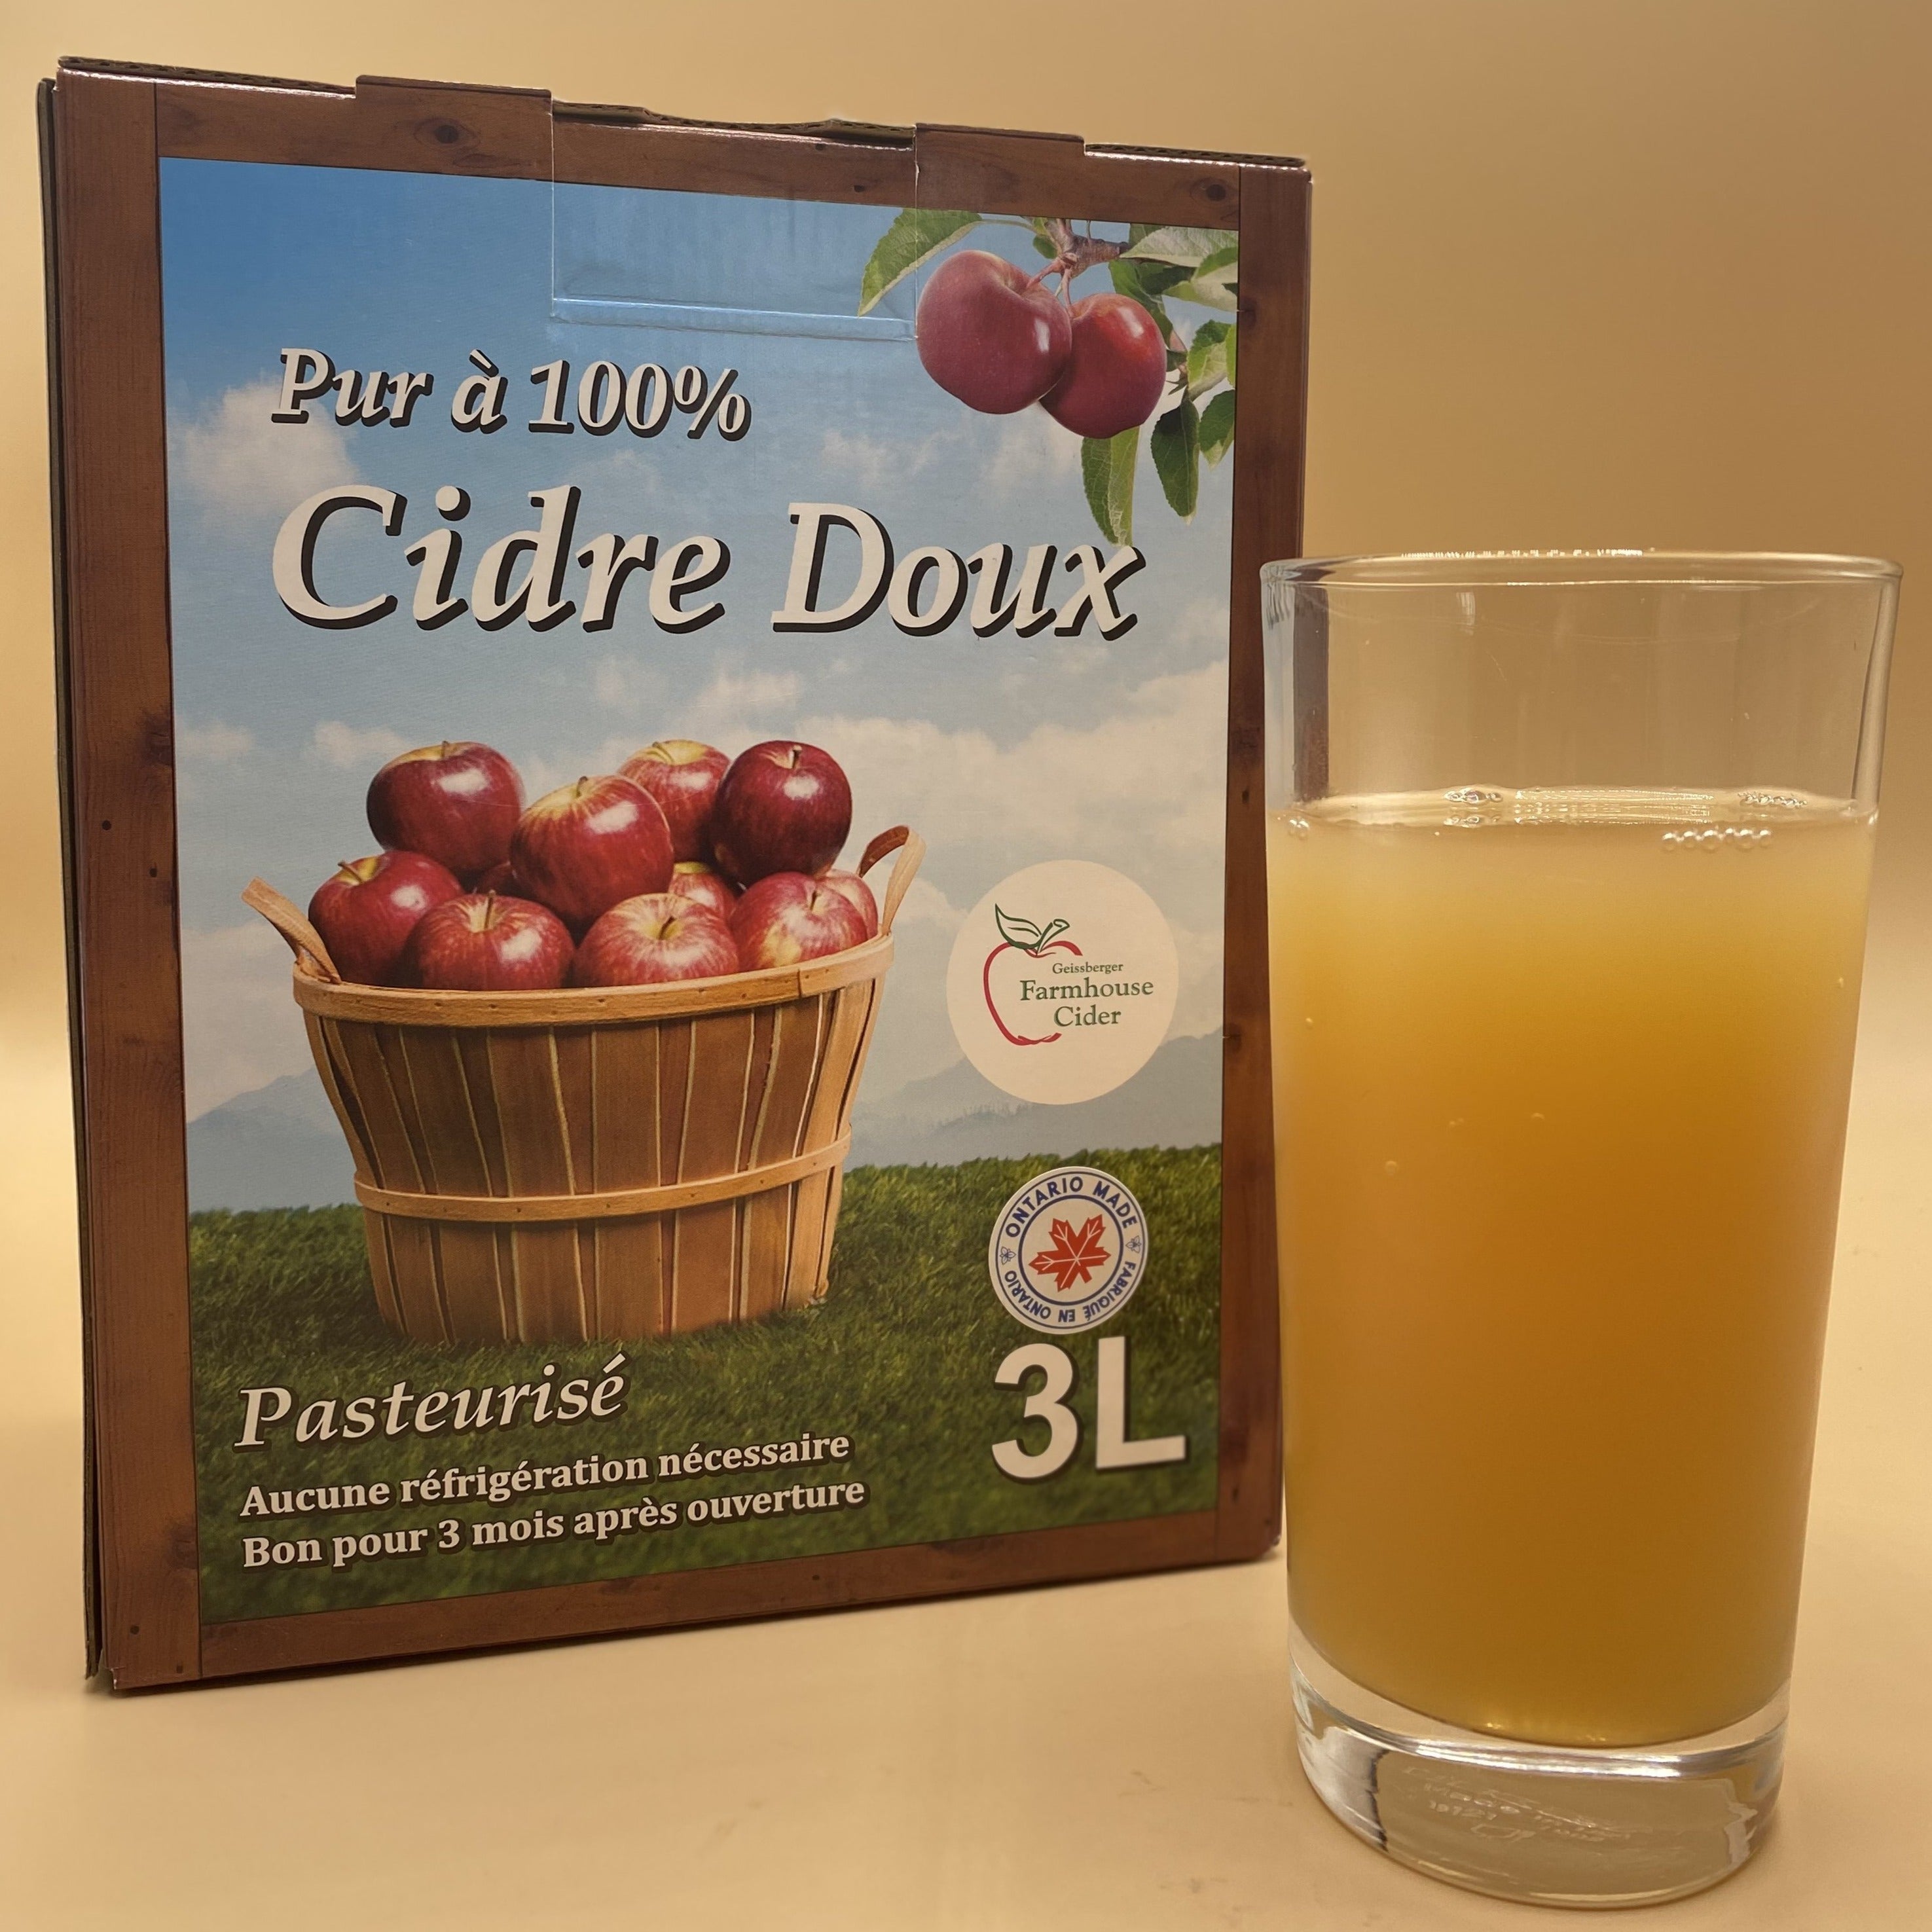 Glass and box of apple cider